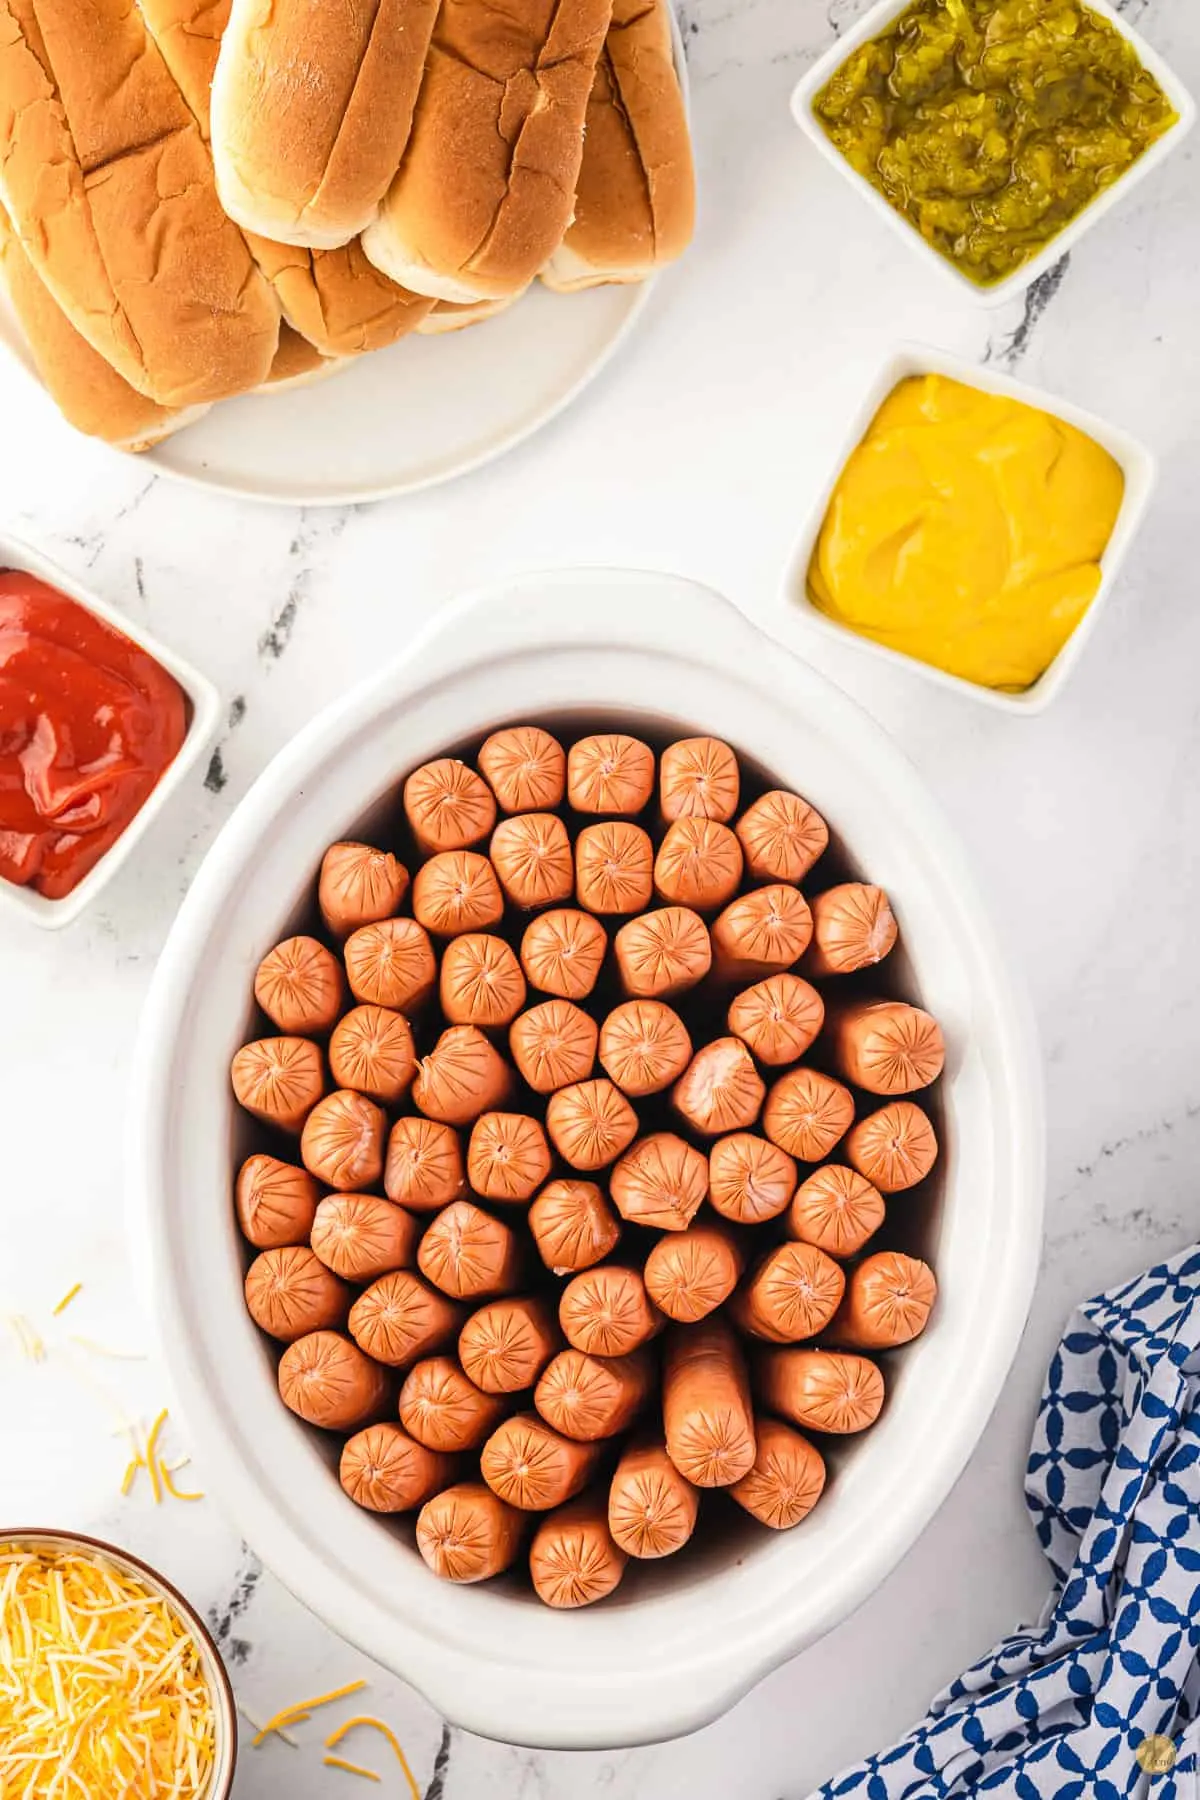 slow cooker full of hot dogs